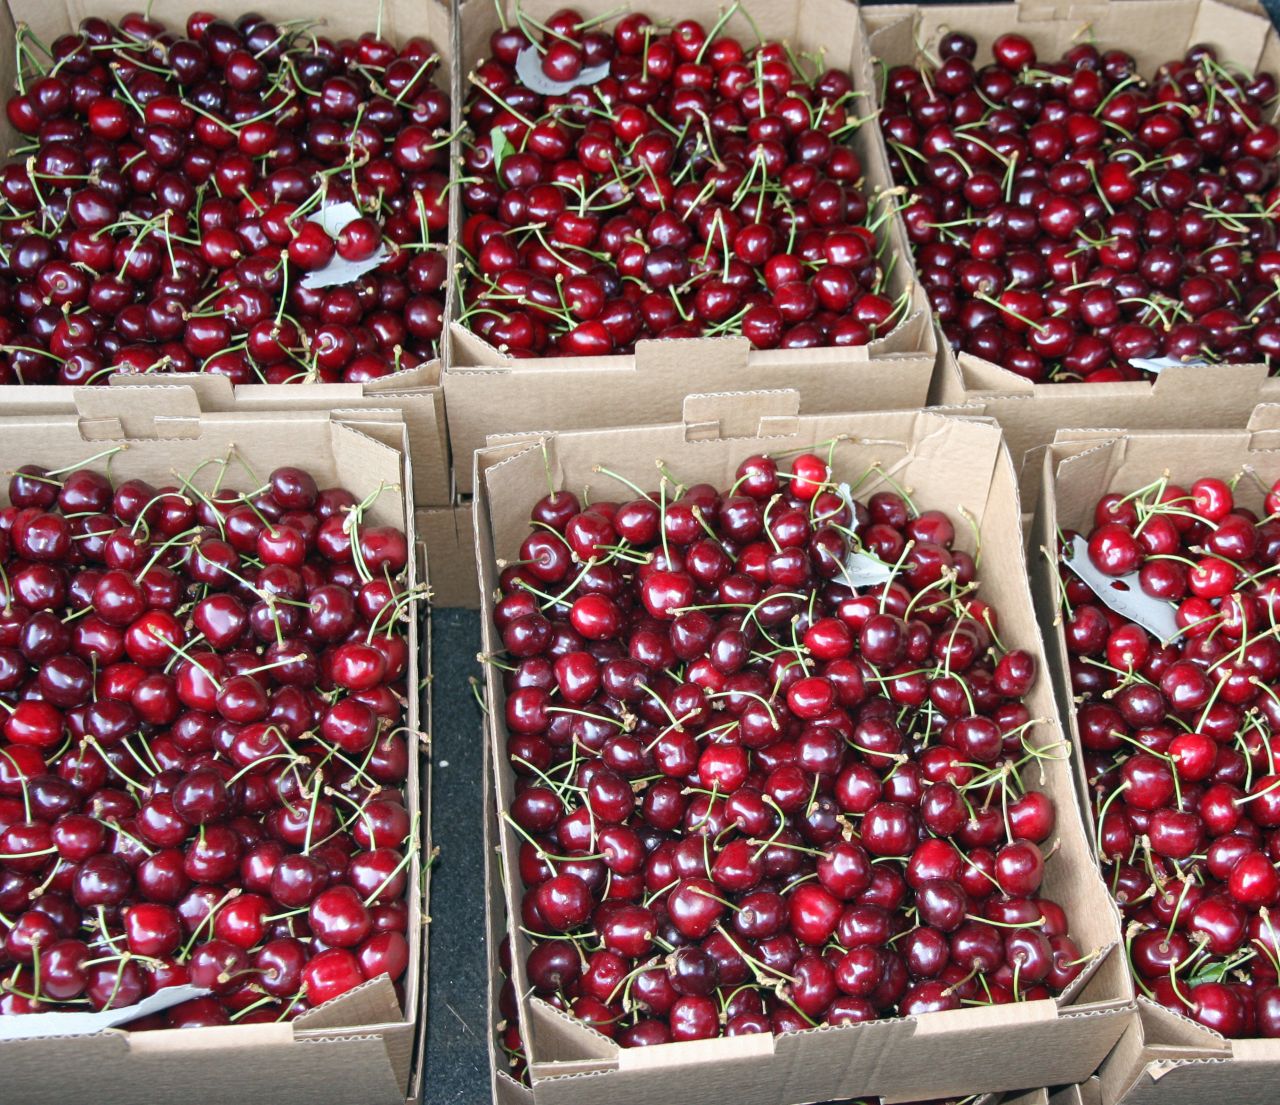 Cherries are eighth on the list this year. The <a href="https://www.ams.usda.gov/sites/default/files/media/2019PDPAnnualSummary.pdf" target="_blank" target="_blank">Pesticide Data Program</a> reports issued by the US Department of Agriculture indicated that when pesticide residues are found on foods, they are nearly always at levels below the human tolerance limits set by the agency.